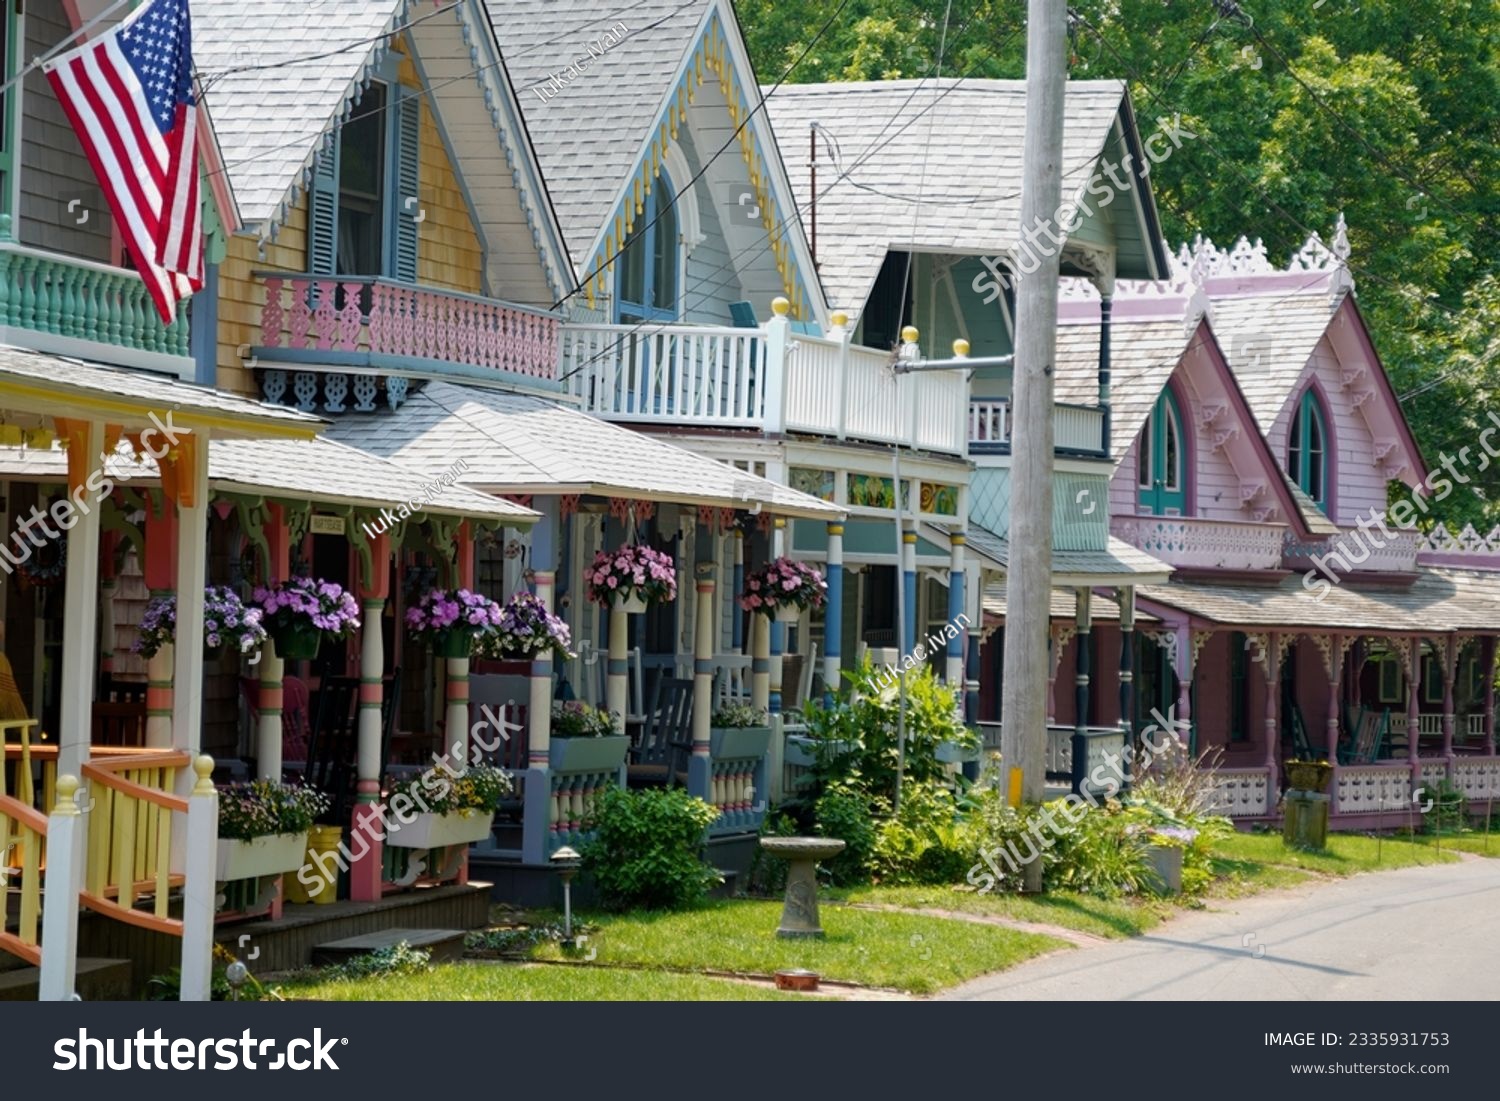 Beautiful colorful gingerbread houses, cottages in Oak Bluffs center, Martha's Vineyard island in Massachusetts USA on a sunny summer day #2335931753